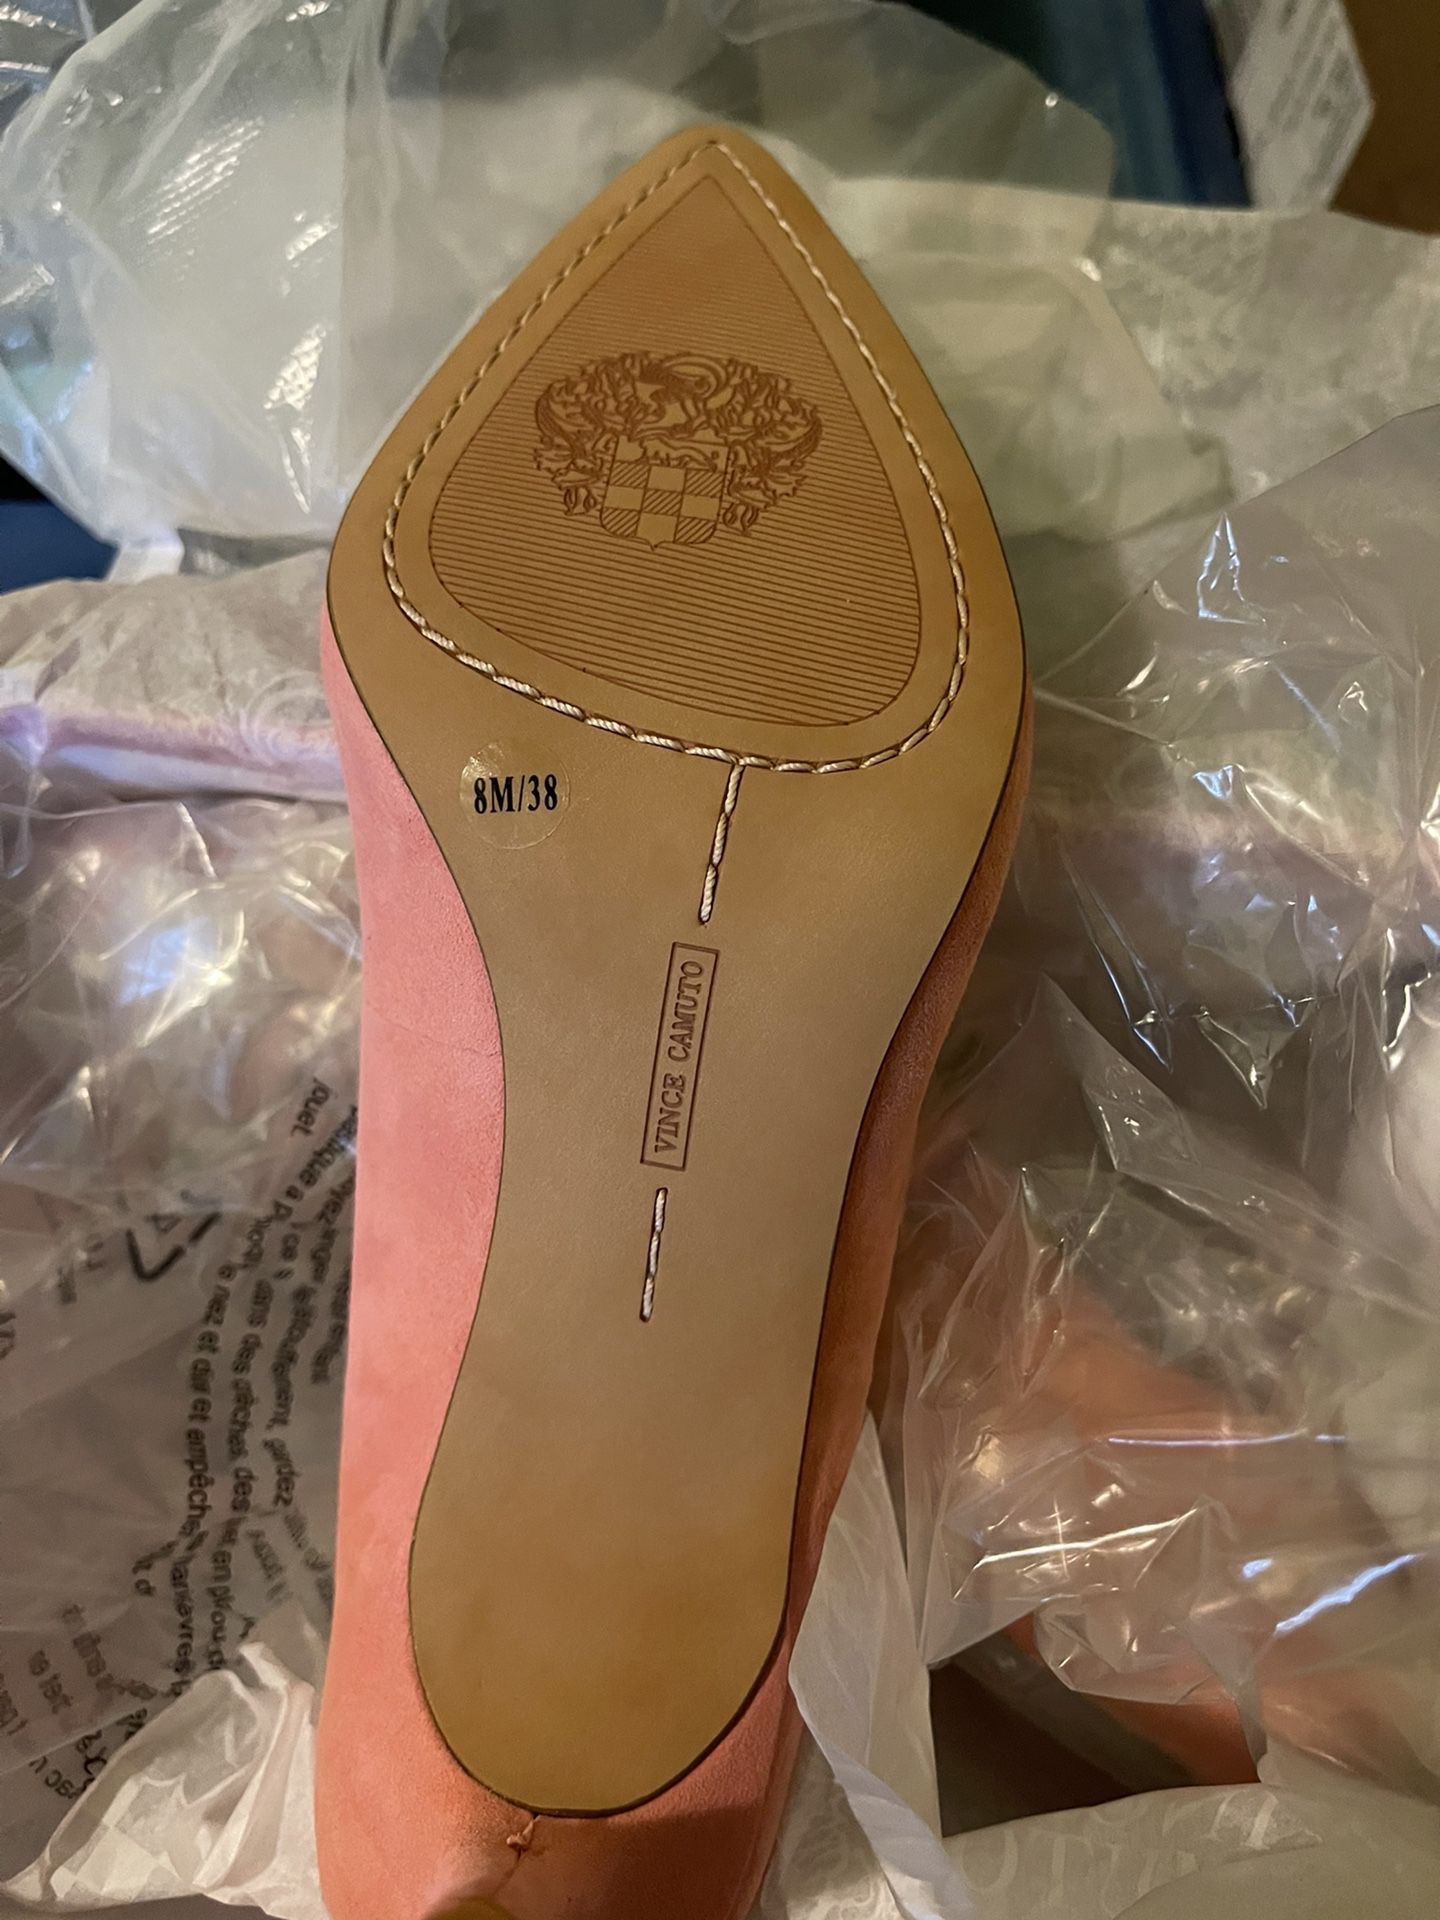 Vince Camuto Shoes for Sale in Franklin Square, NY - OfferUp